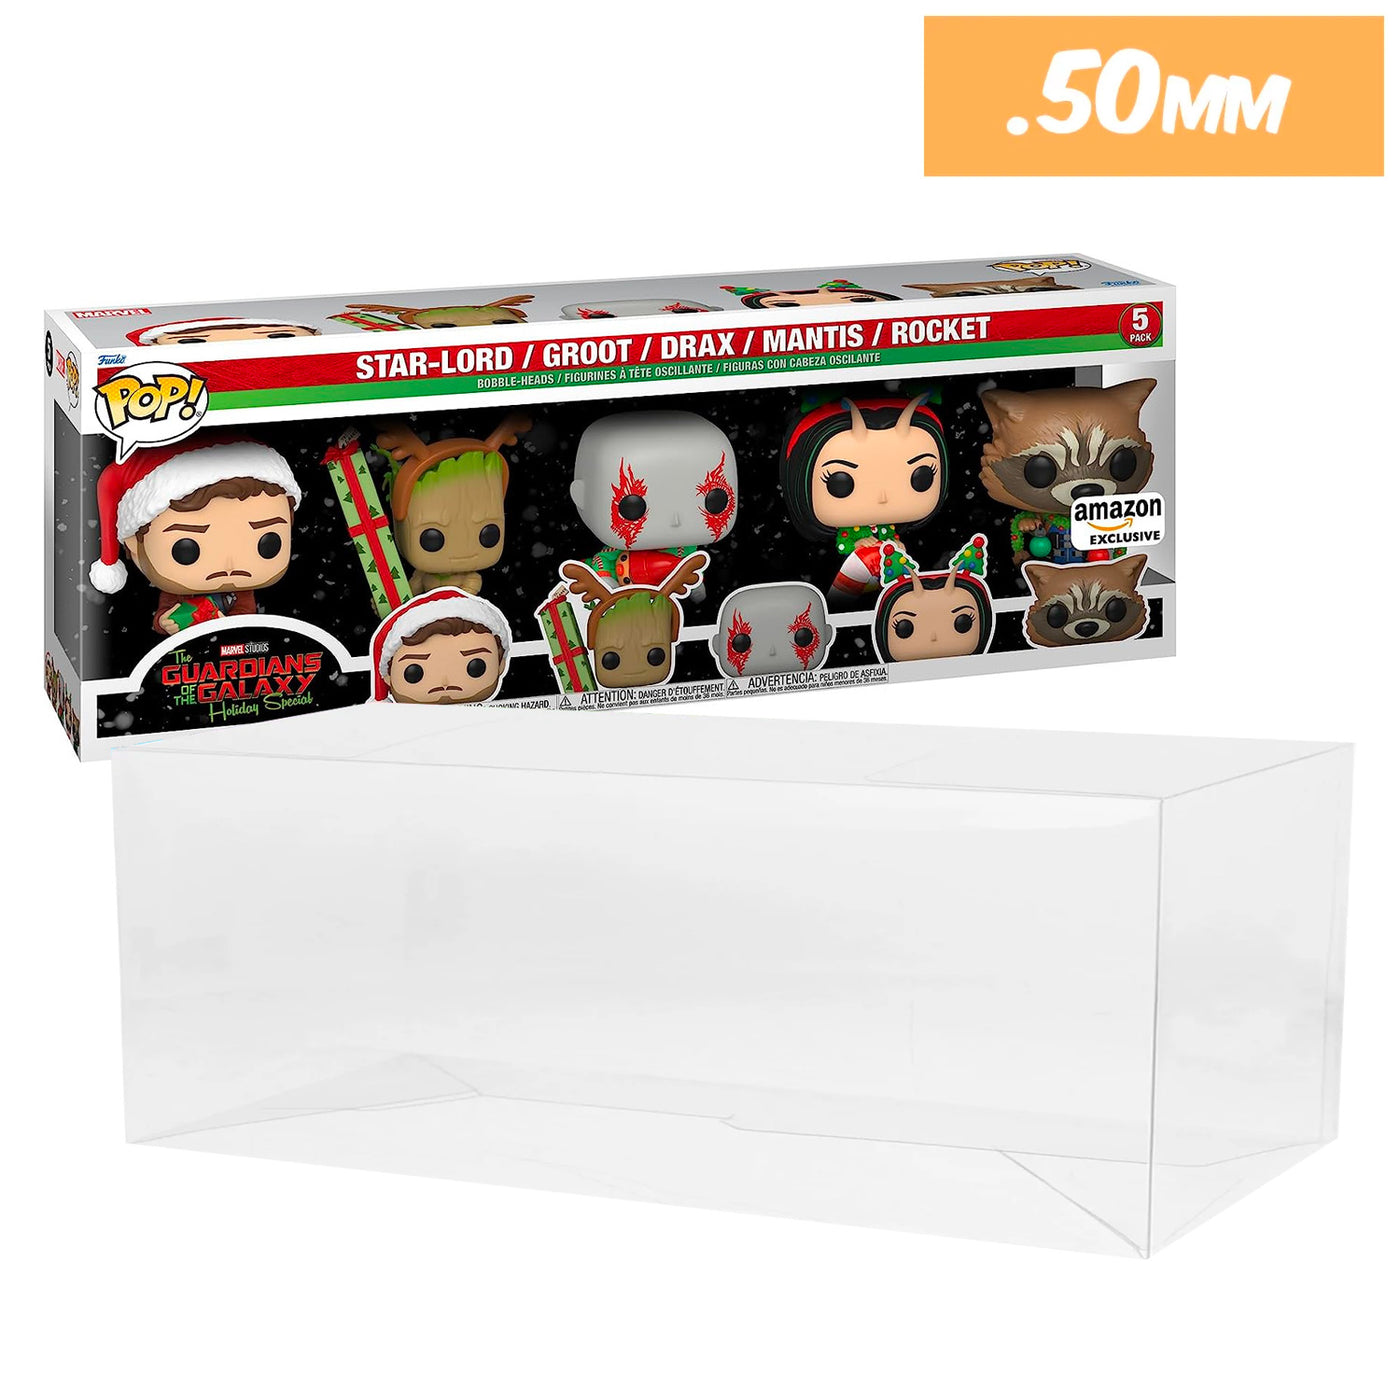 guardians of the galaxy holiday 5 pack best funko pop protectors thick strong uv scratch flat top stack vinyl display geek plastic shield vaulted eco armor fits collect protect display case kollector protector